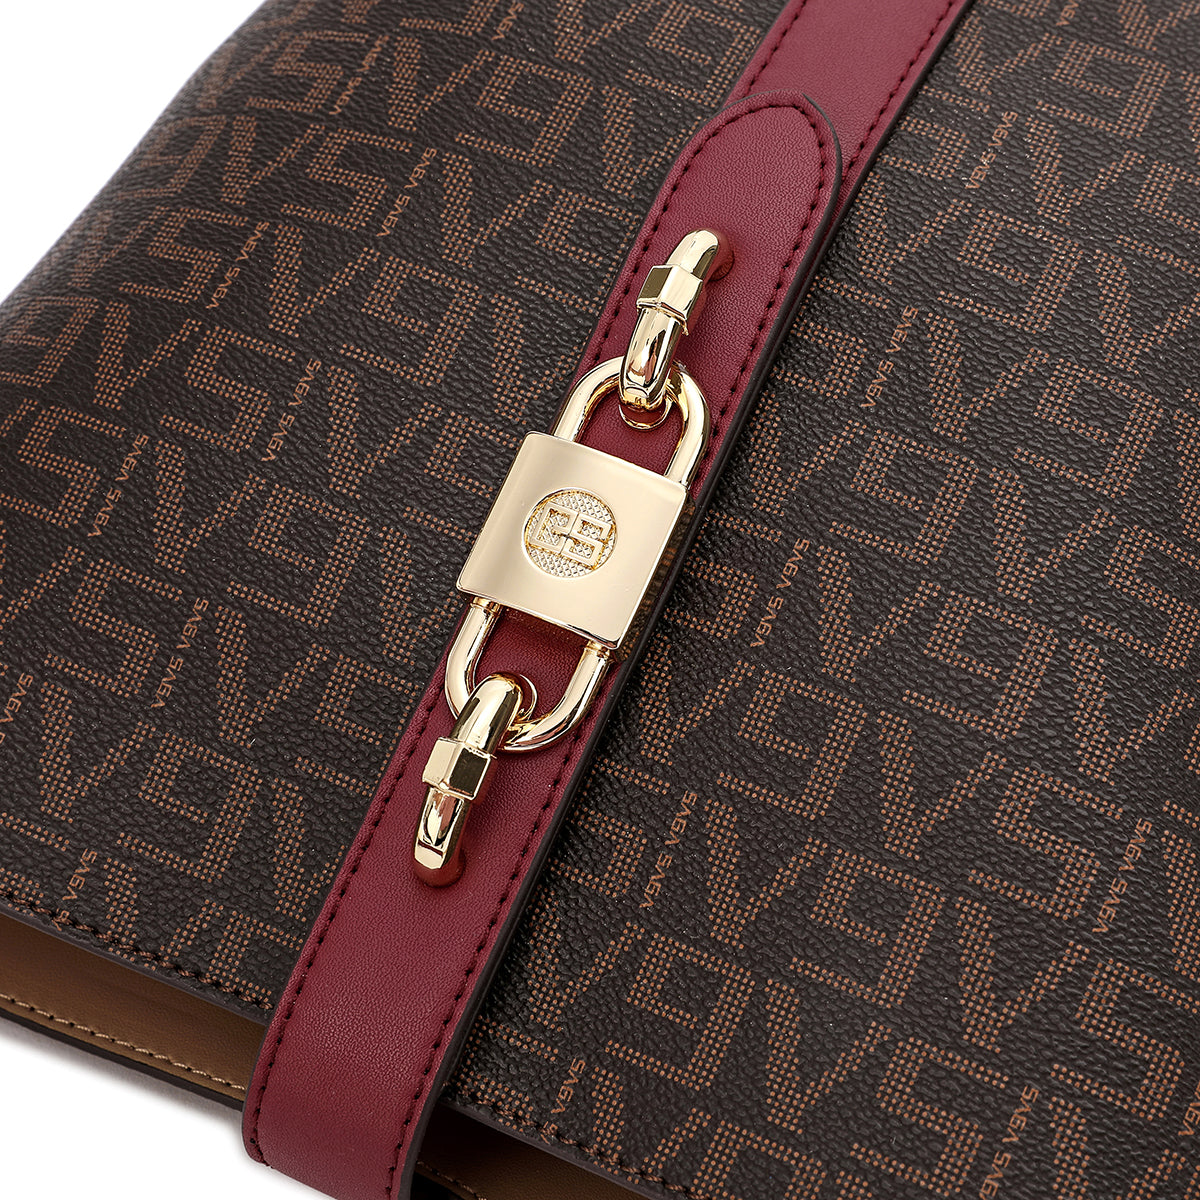 Stylish and distinctive bag for women from Saga, with Saga logo embossed and long straps, maroon color